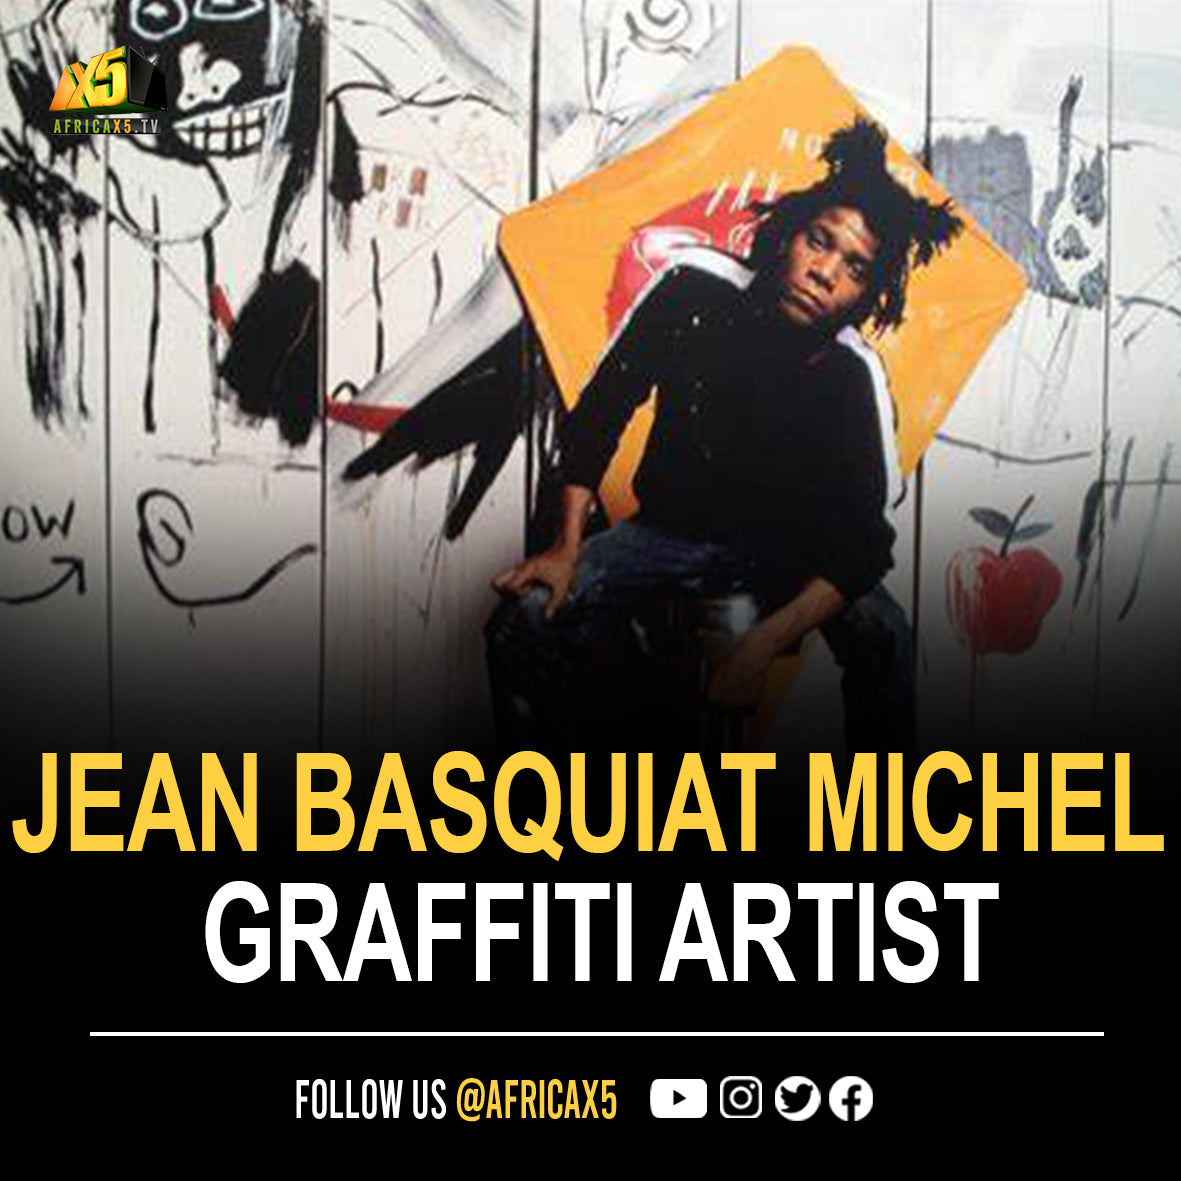 Jean-Michel Basquiat an obscure graffiti artist in New York City in the late 1970s and evolved into an acclaimed Neo-expressionist and Primitivist painter by the 1980s